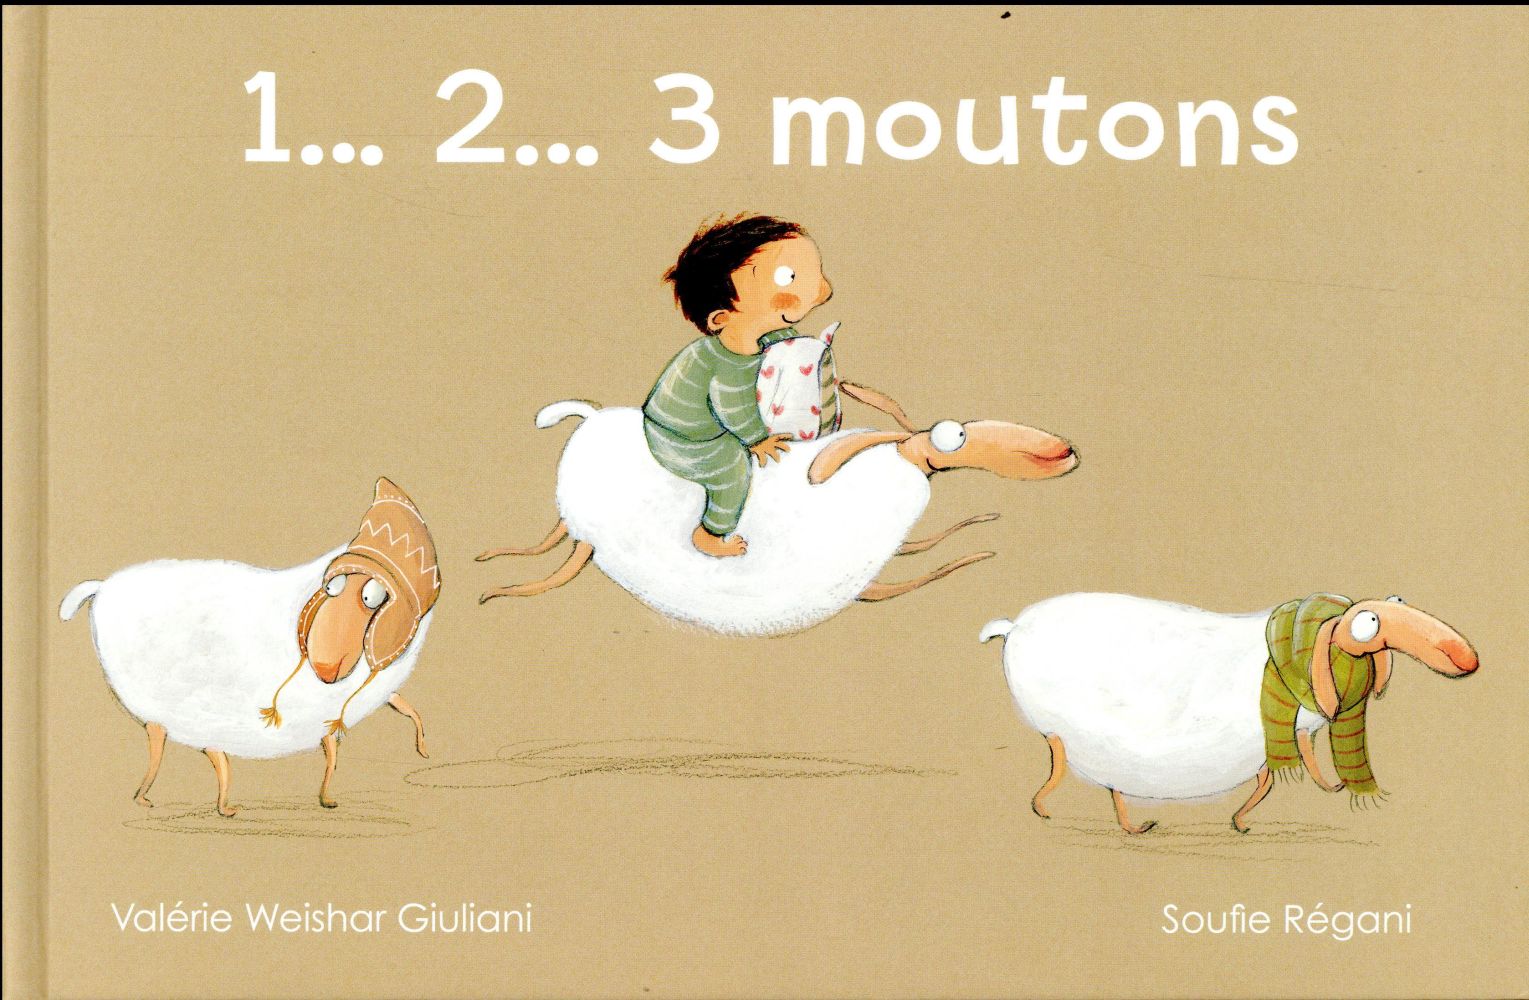 1 2 3 MOUTONS